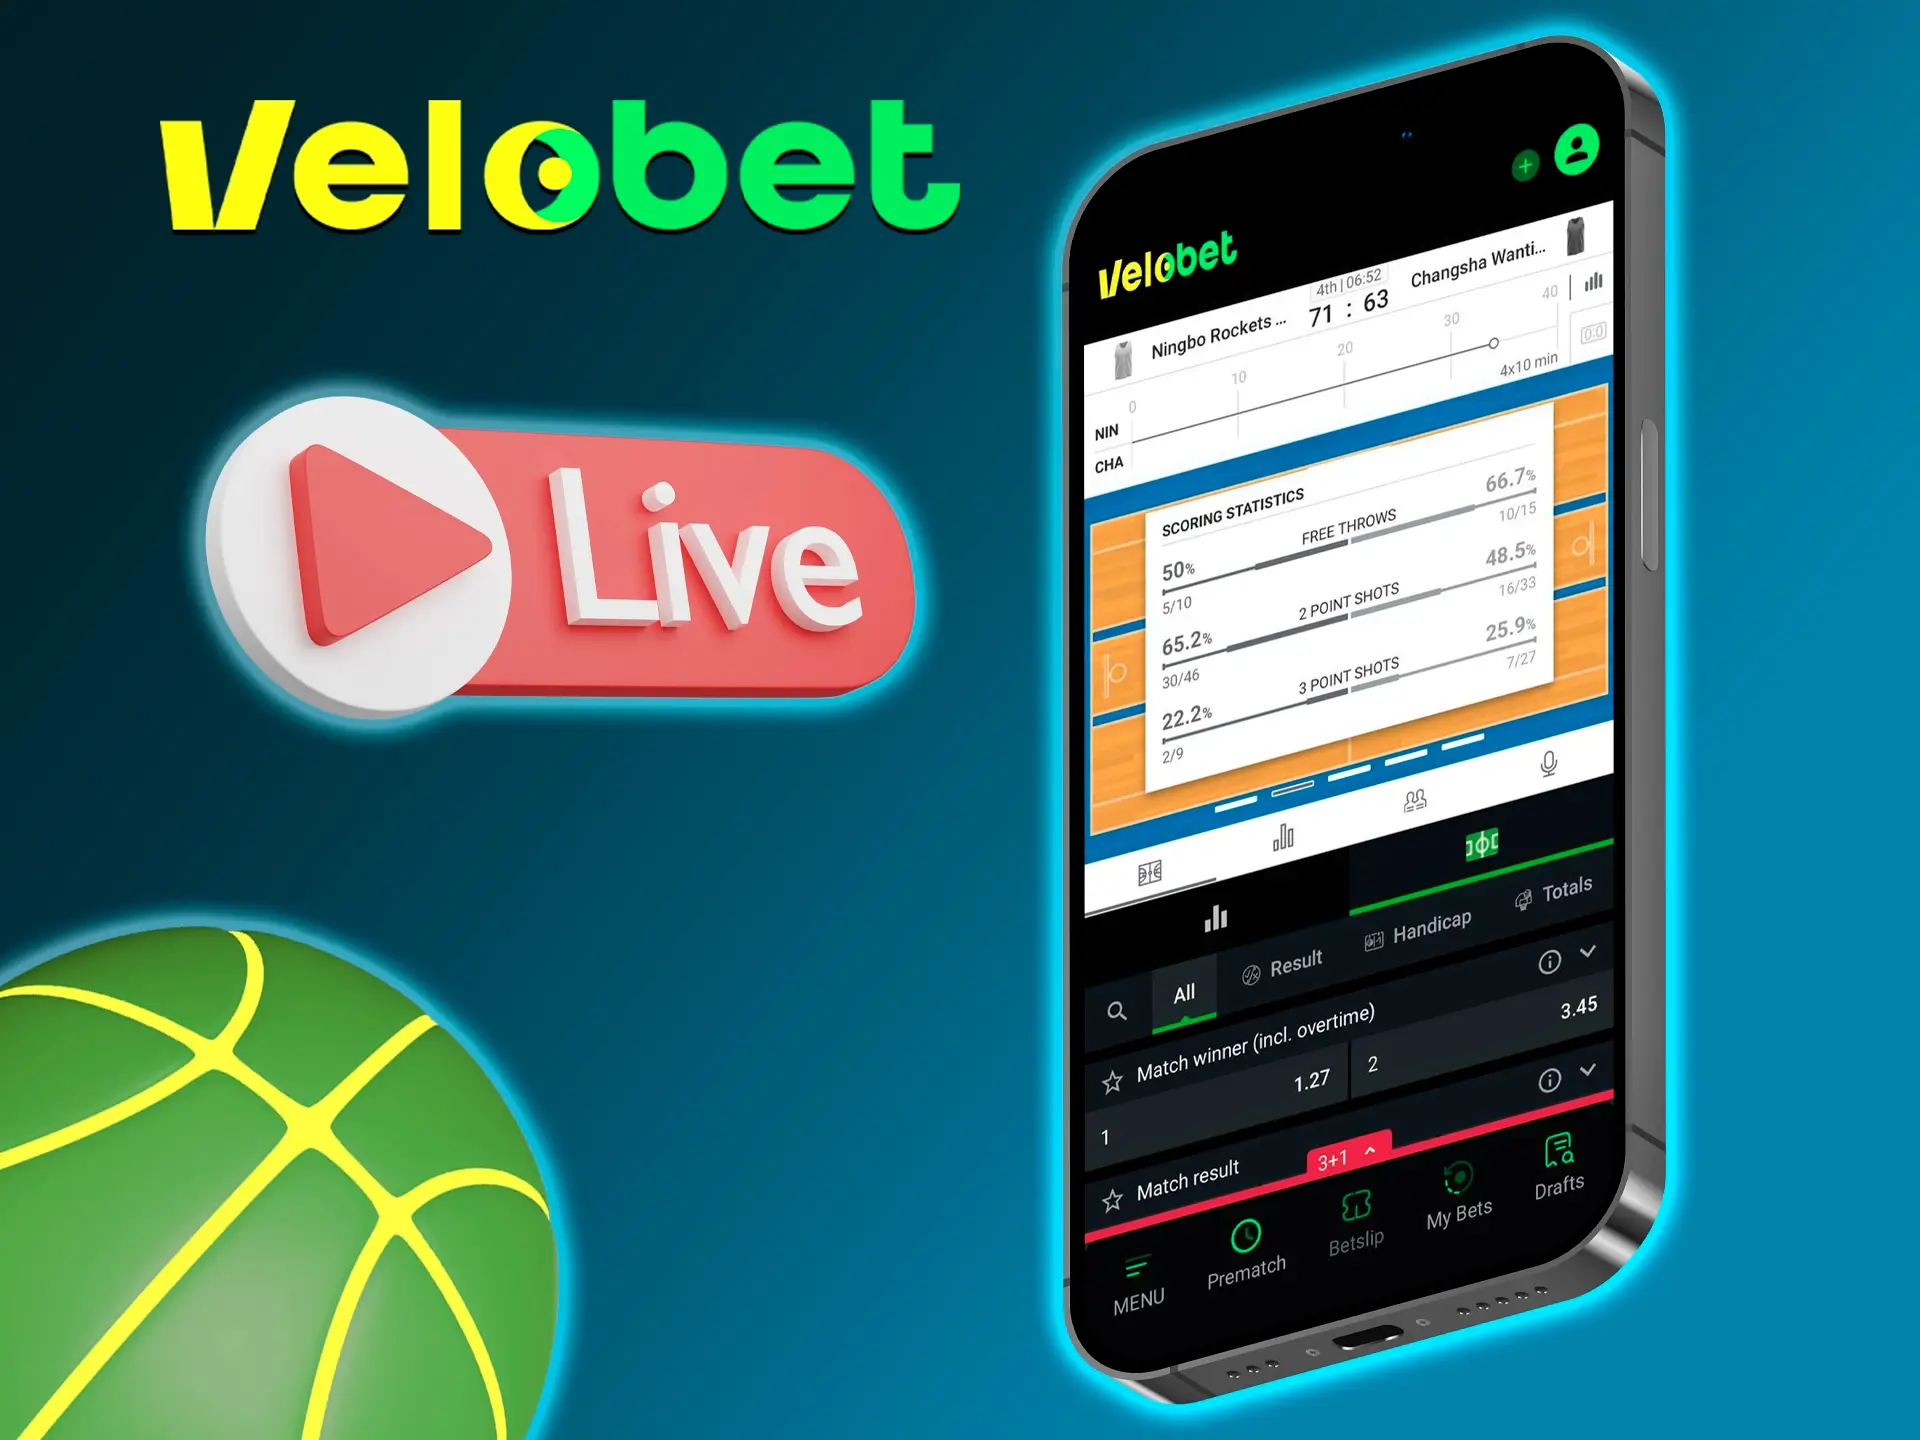 The Velobet app allows you to watch broadcasts of your favourite matches online and place bets.